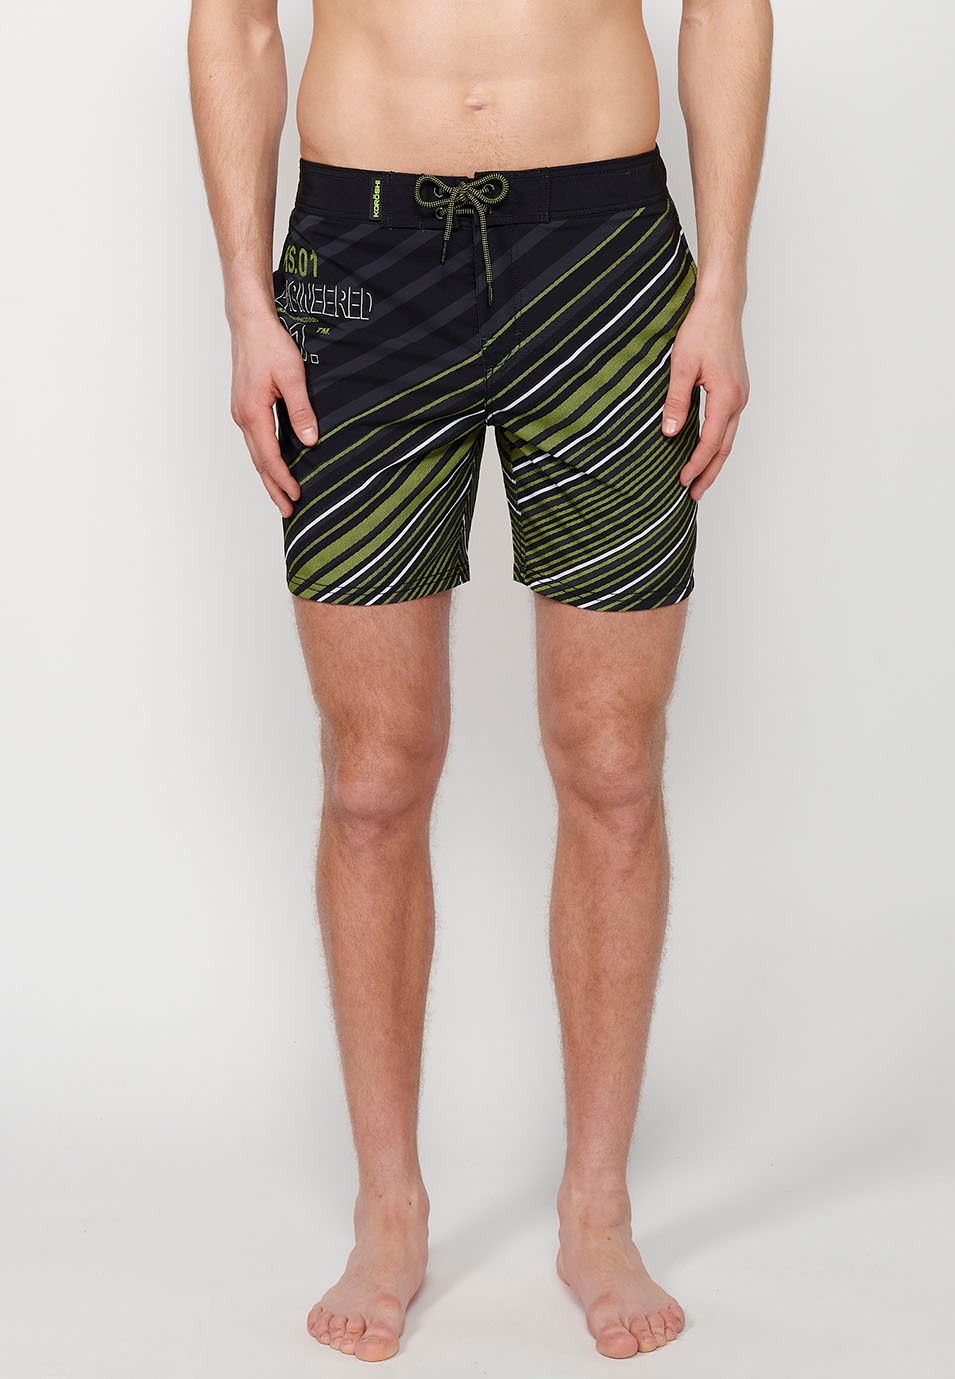 Printed short swimsuit with adjustable waist with drawstring and back pocket and one interior pocket in Lime Color for Men 3